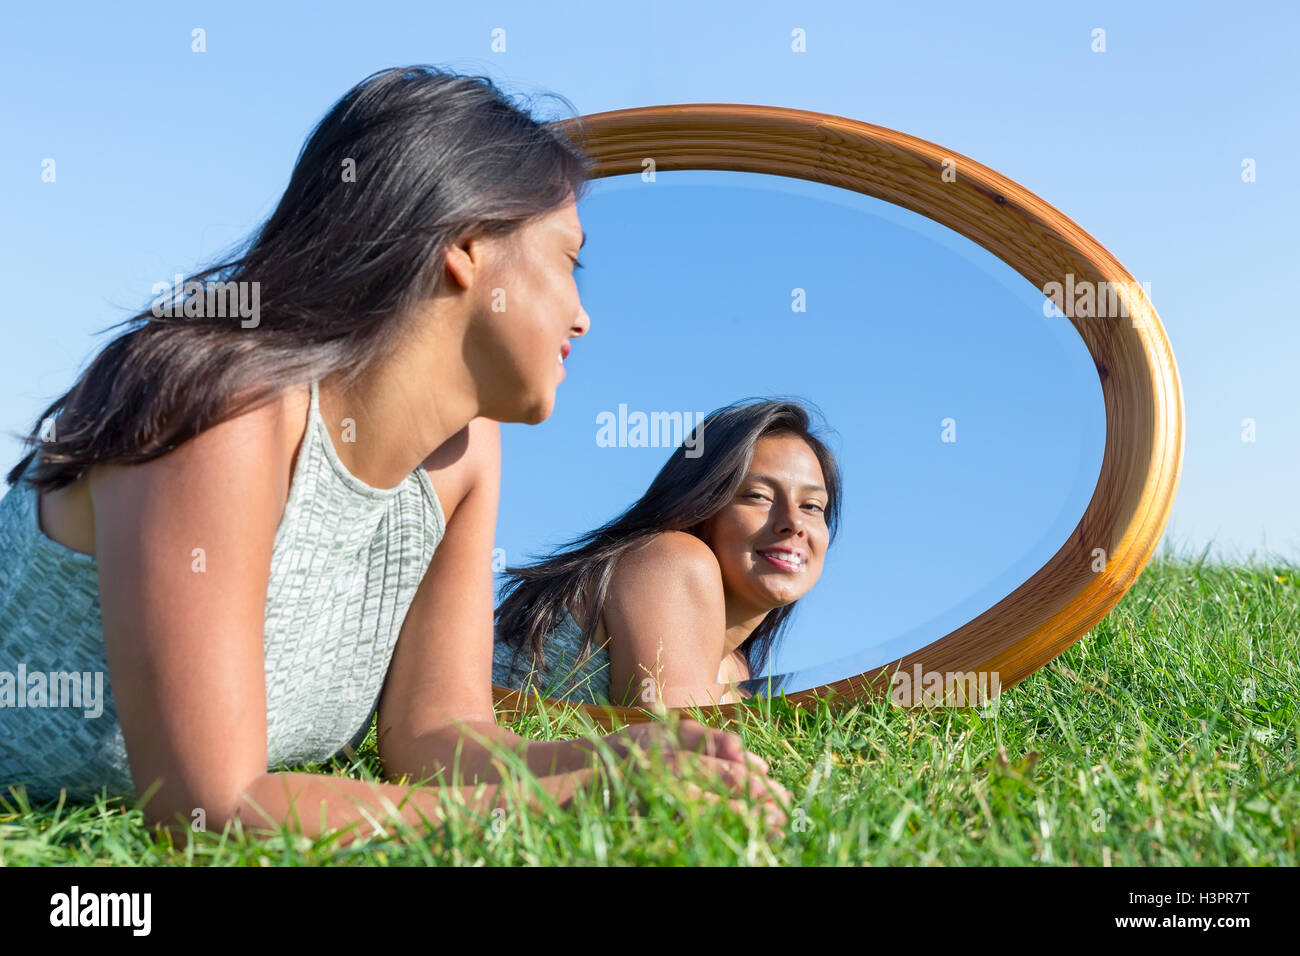 Woman lying on grass looking at son image miroir Banque D'Images